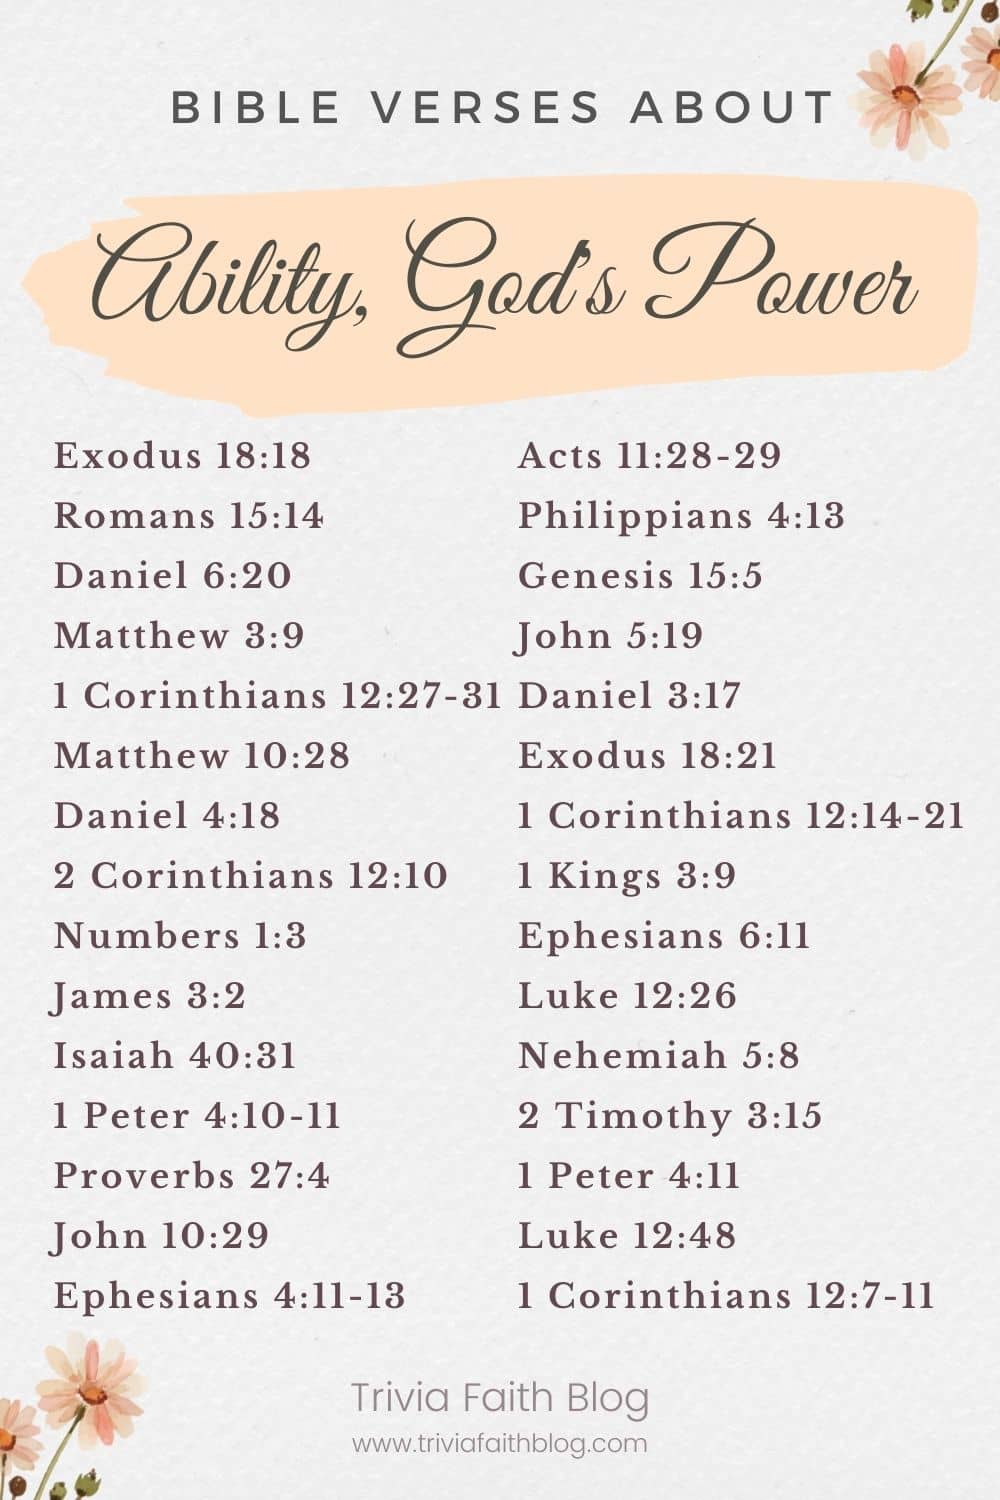 Bible verses about ability, Gods power